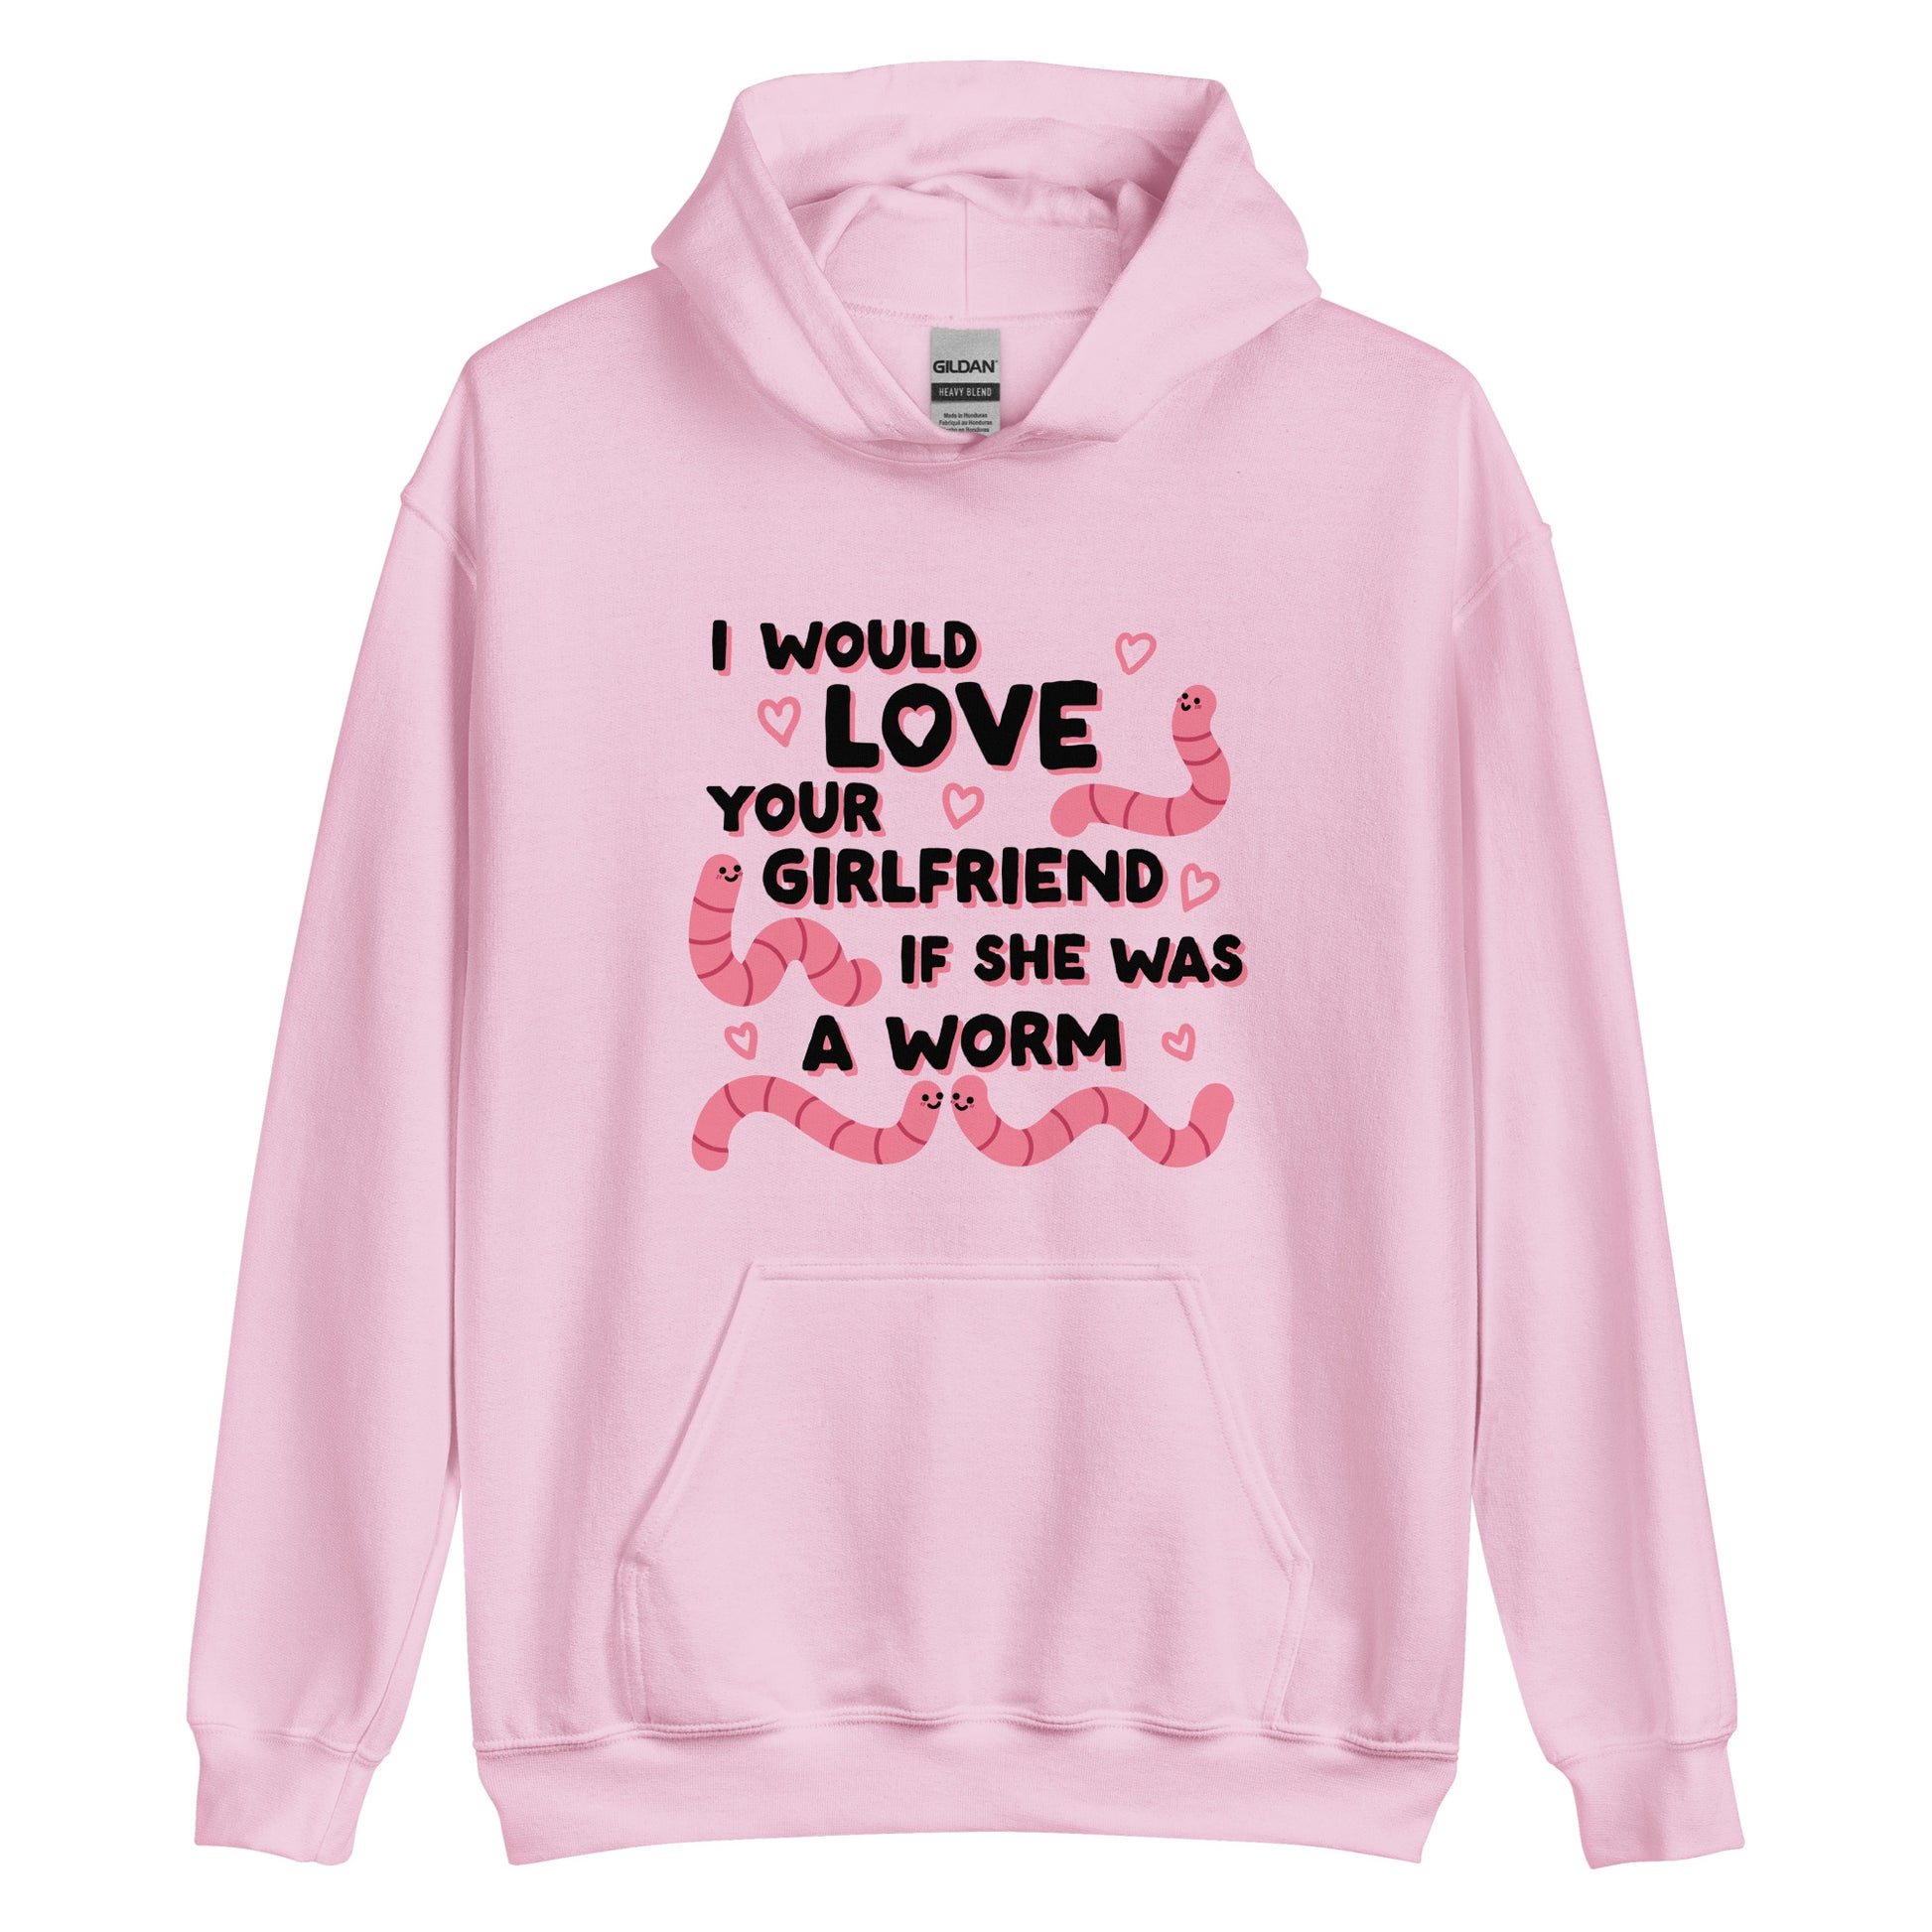 A pink hooded sweatshirt featuring text that reads "I would love your girlfriend if she was a worm". Cute cartoon worms and hearts surround the text.